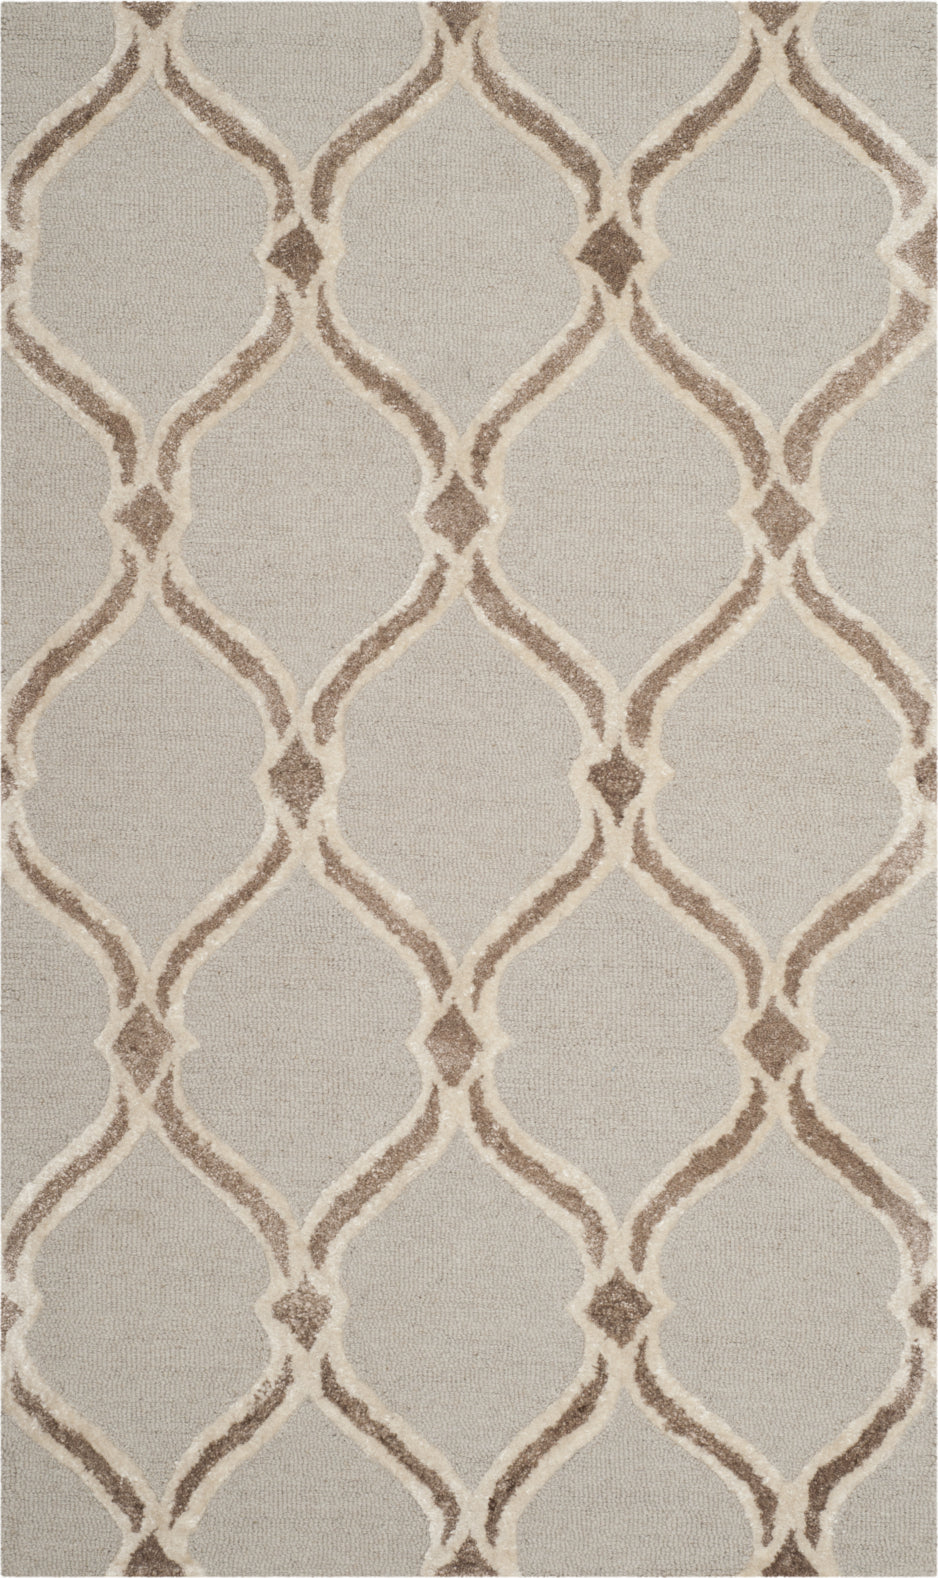 Safavieh Manchester 540 Taupe/Ivory Area Rug main image